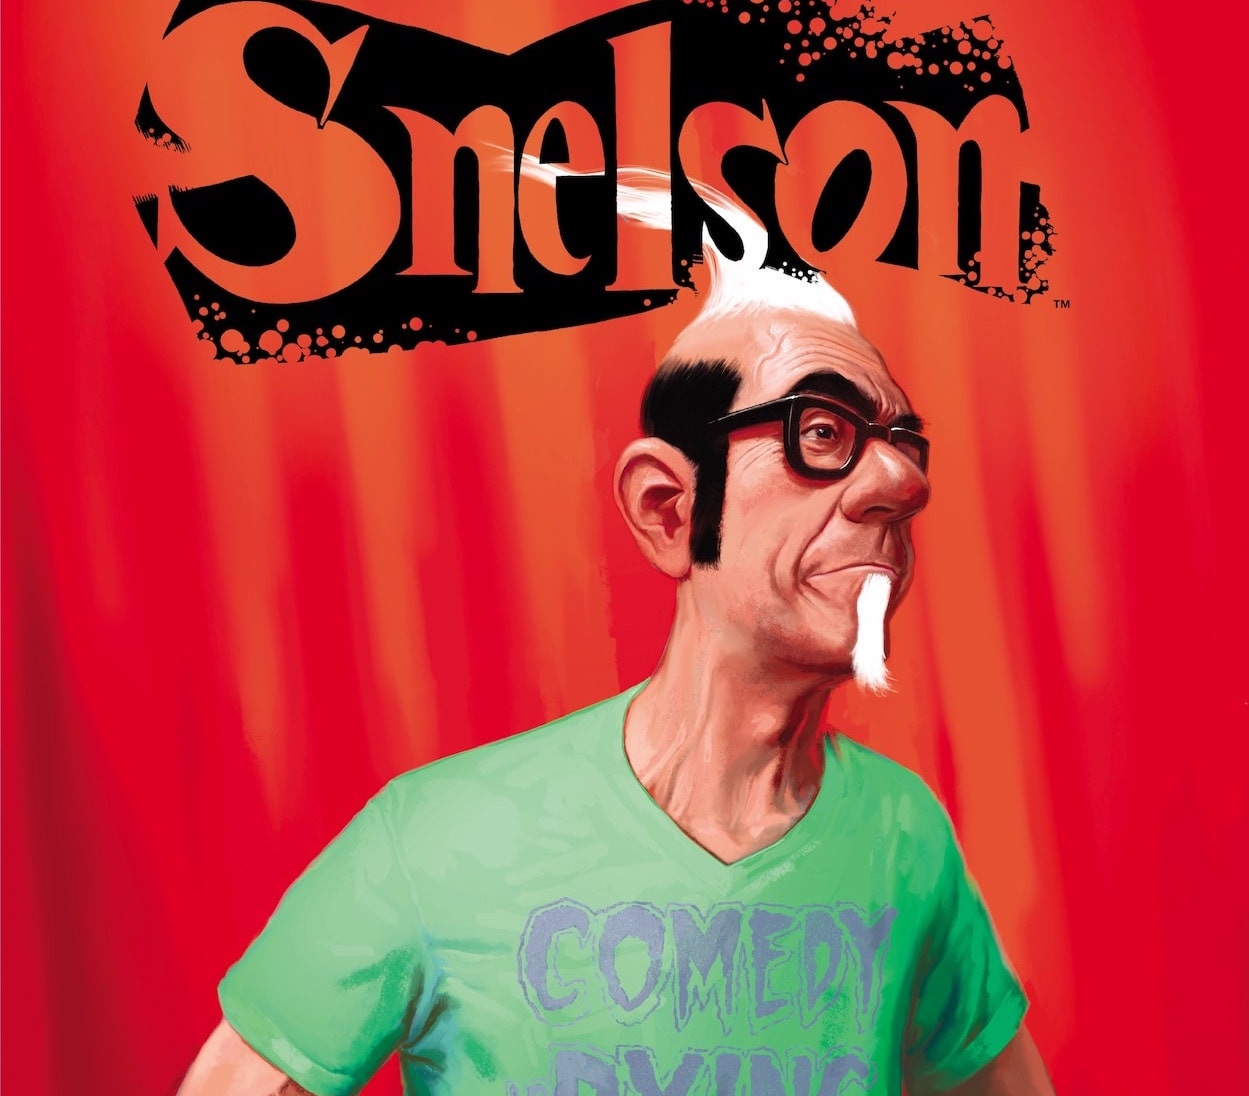 EXCLUSIVE AHOY First Look: Snelson: Comedy is Dying TPB